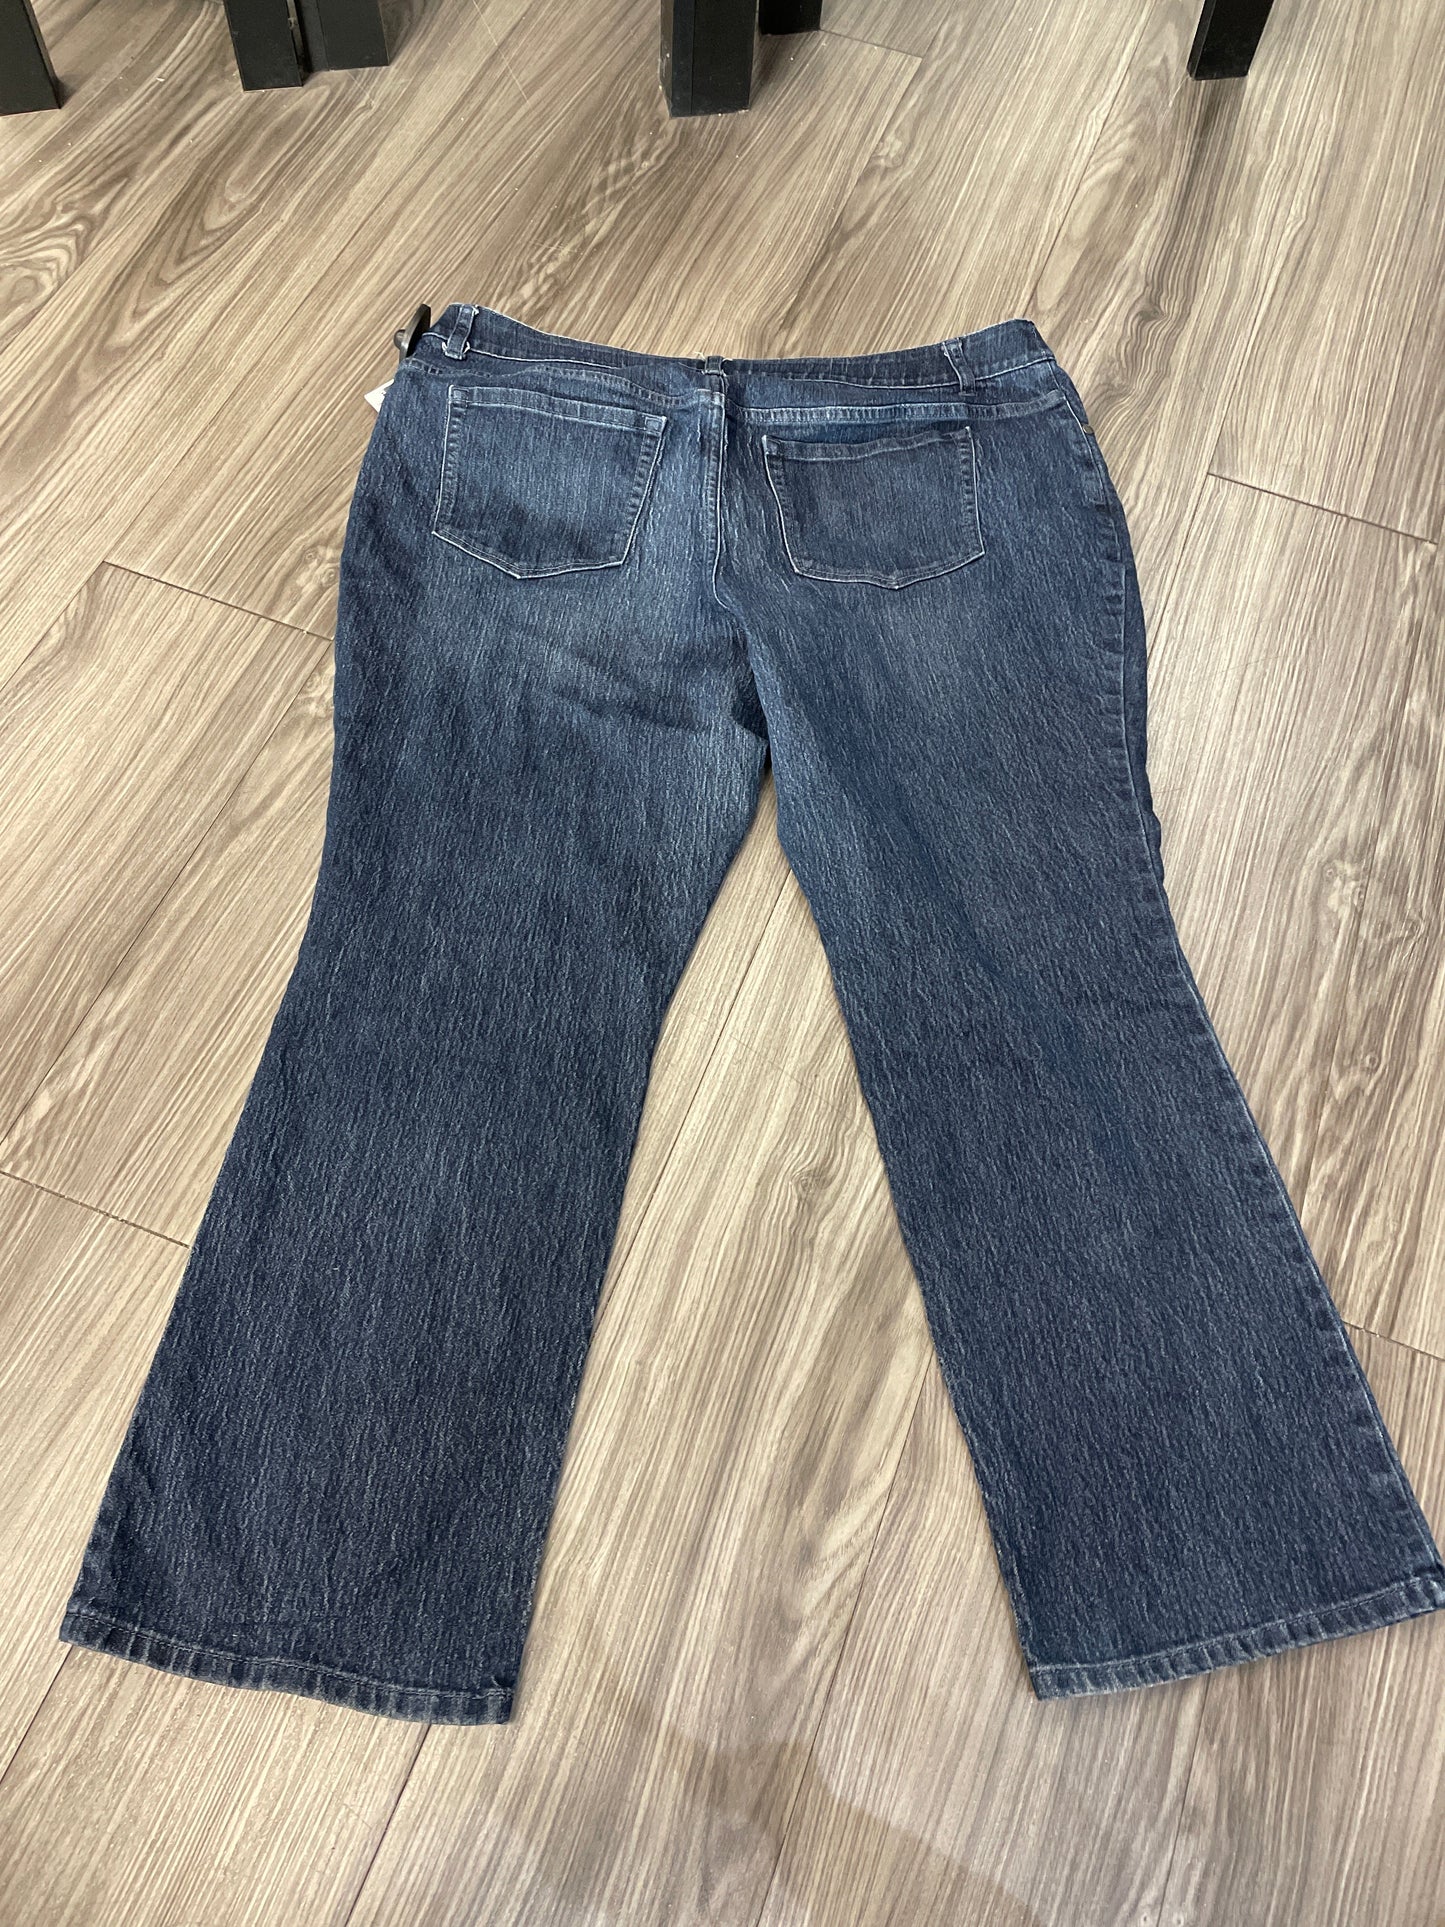 Jeans Boot Cut By Cj Banks  Size: 18